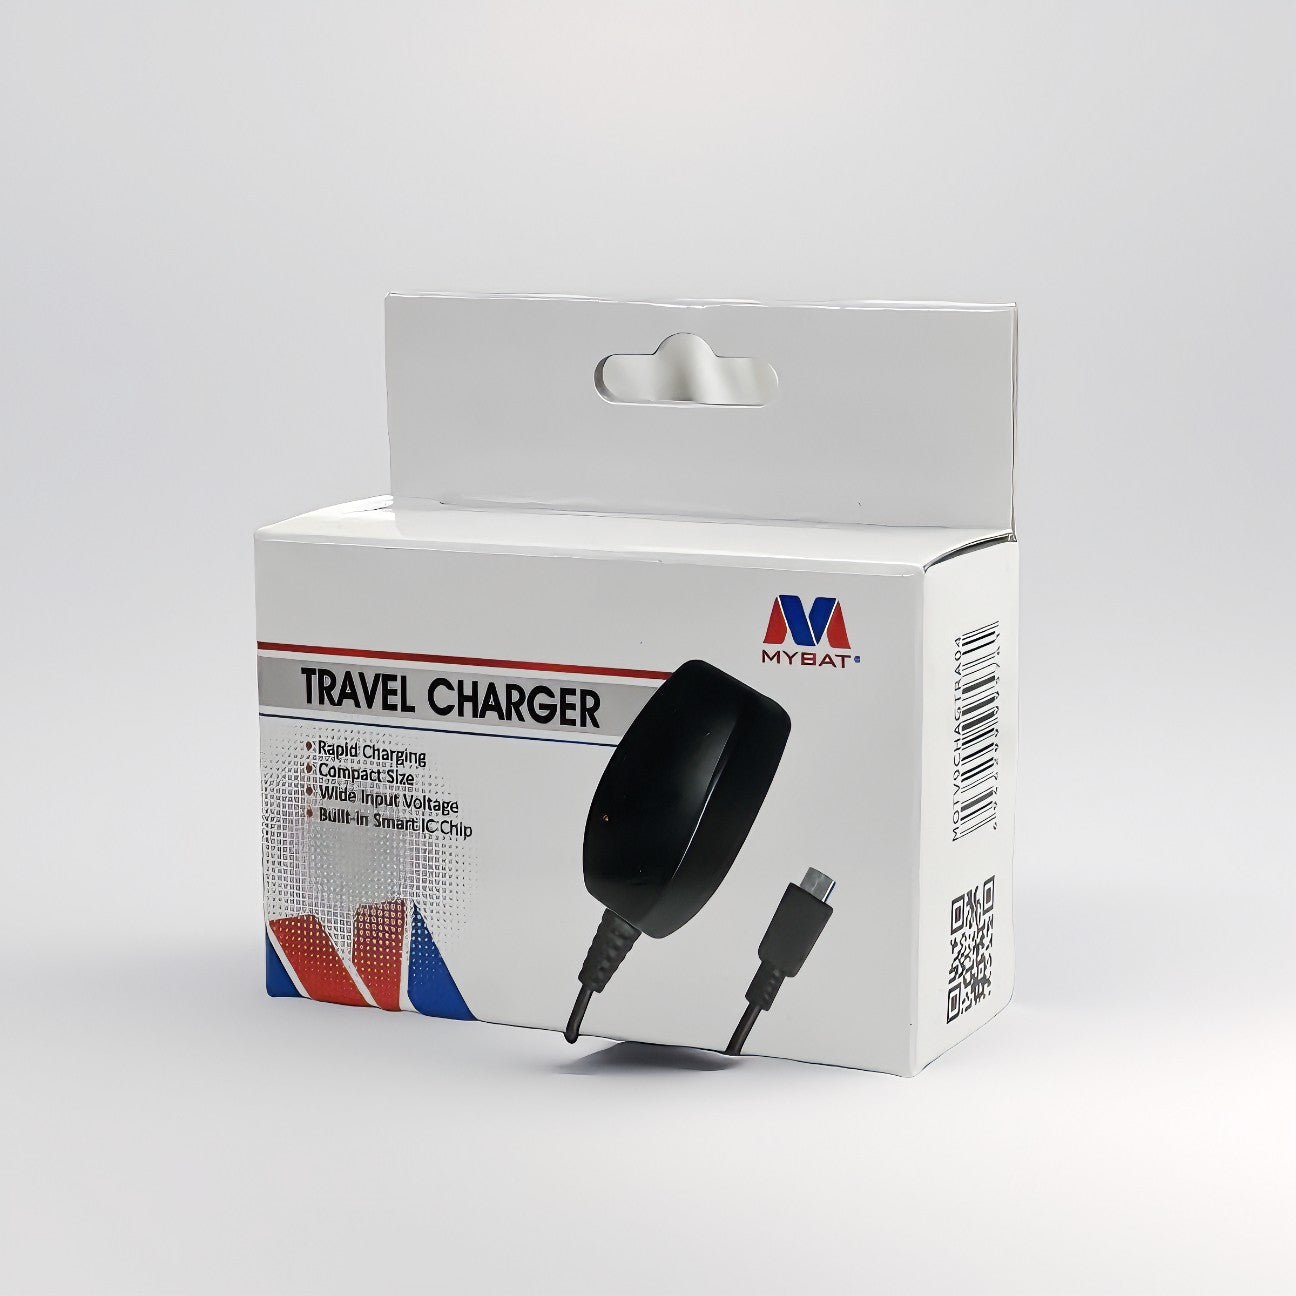 MyBat Micro USB Travel Charger In Retail Packaging